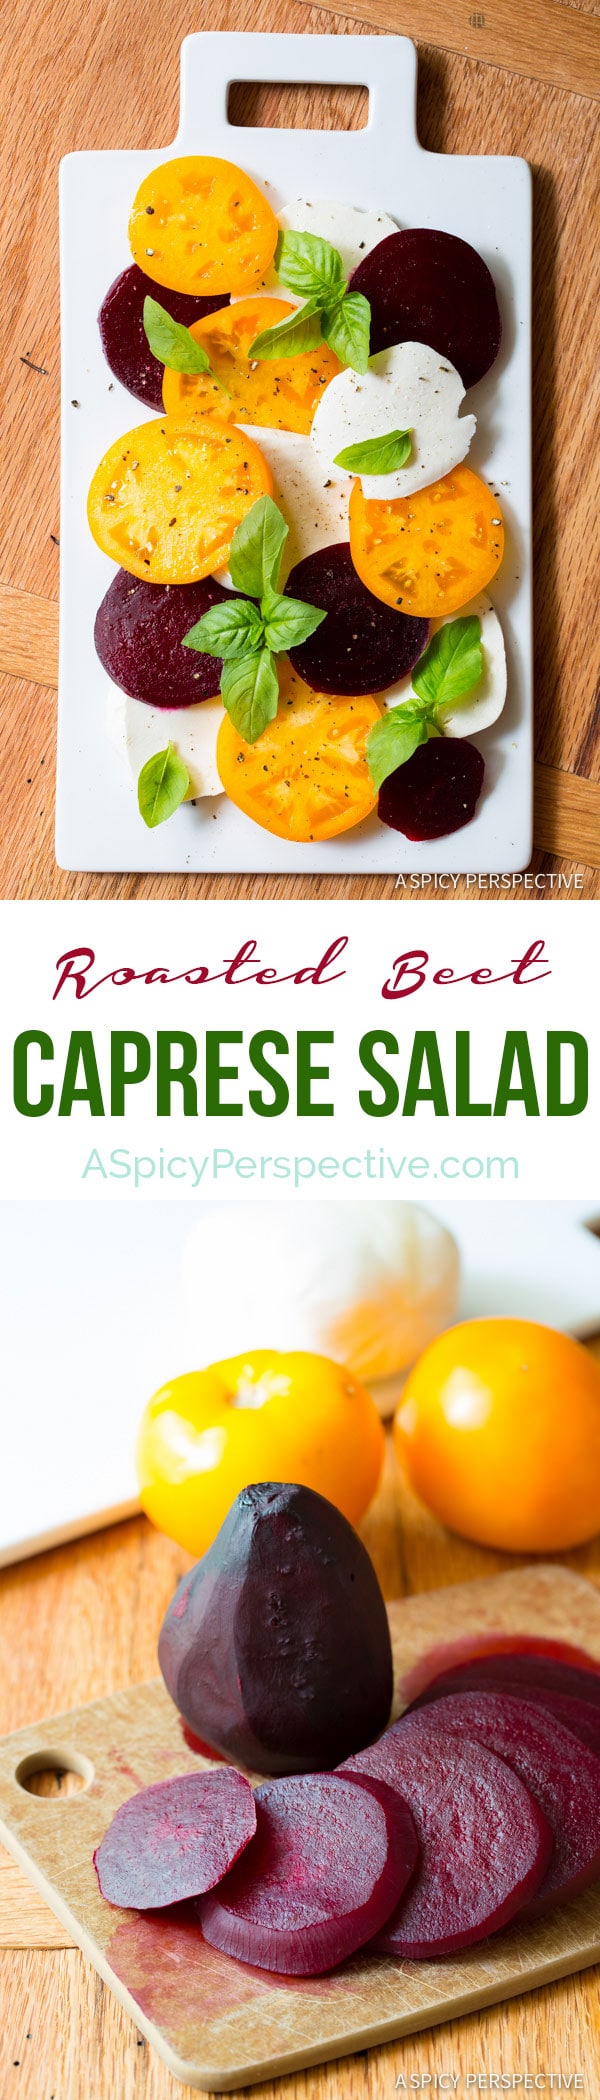 Simple, yet Dazzling Caprese Salad Recipe with Roasted Beets and Garlic Vinaigrette on ASpicyPerspective.com #salad #caprese